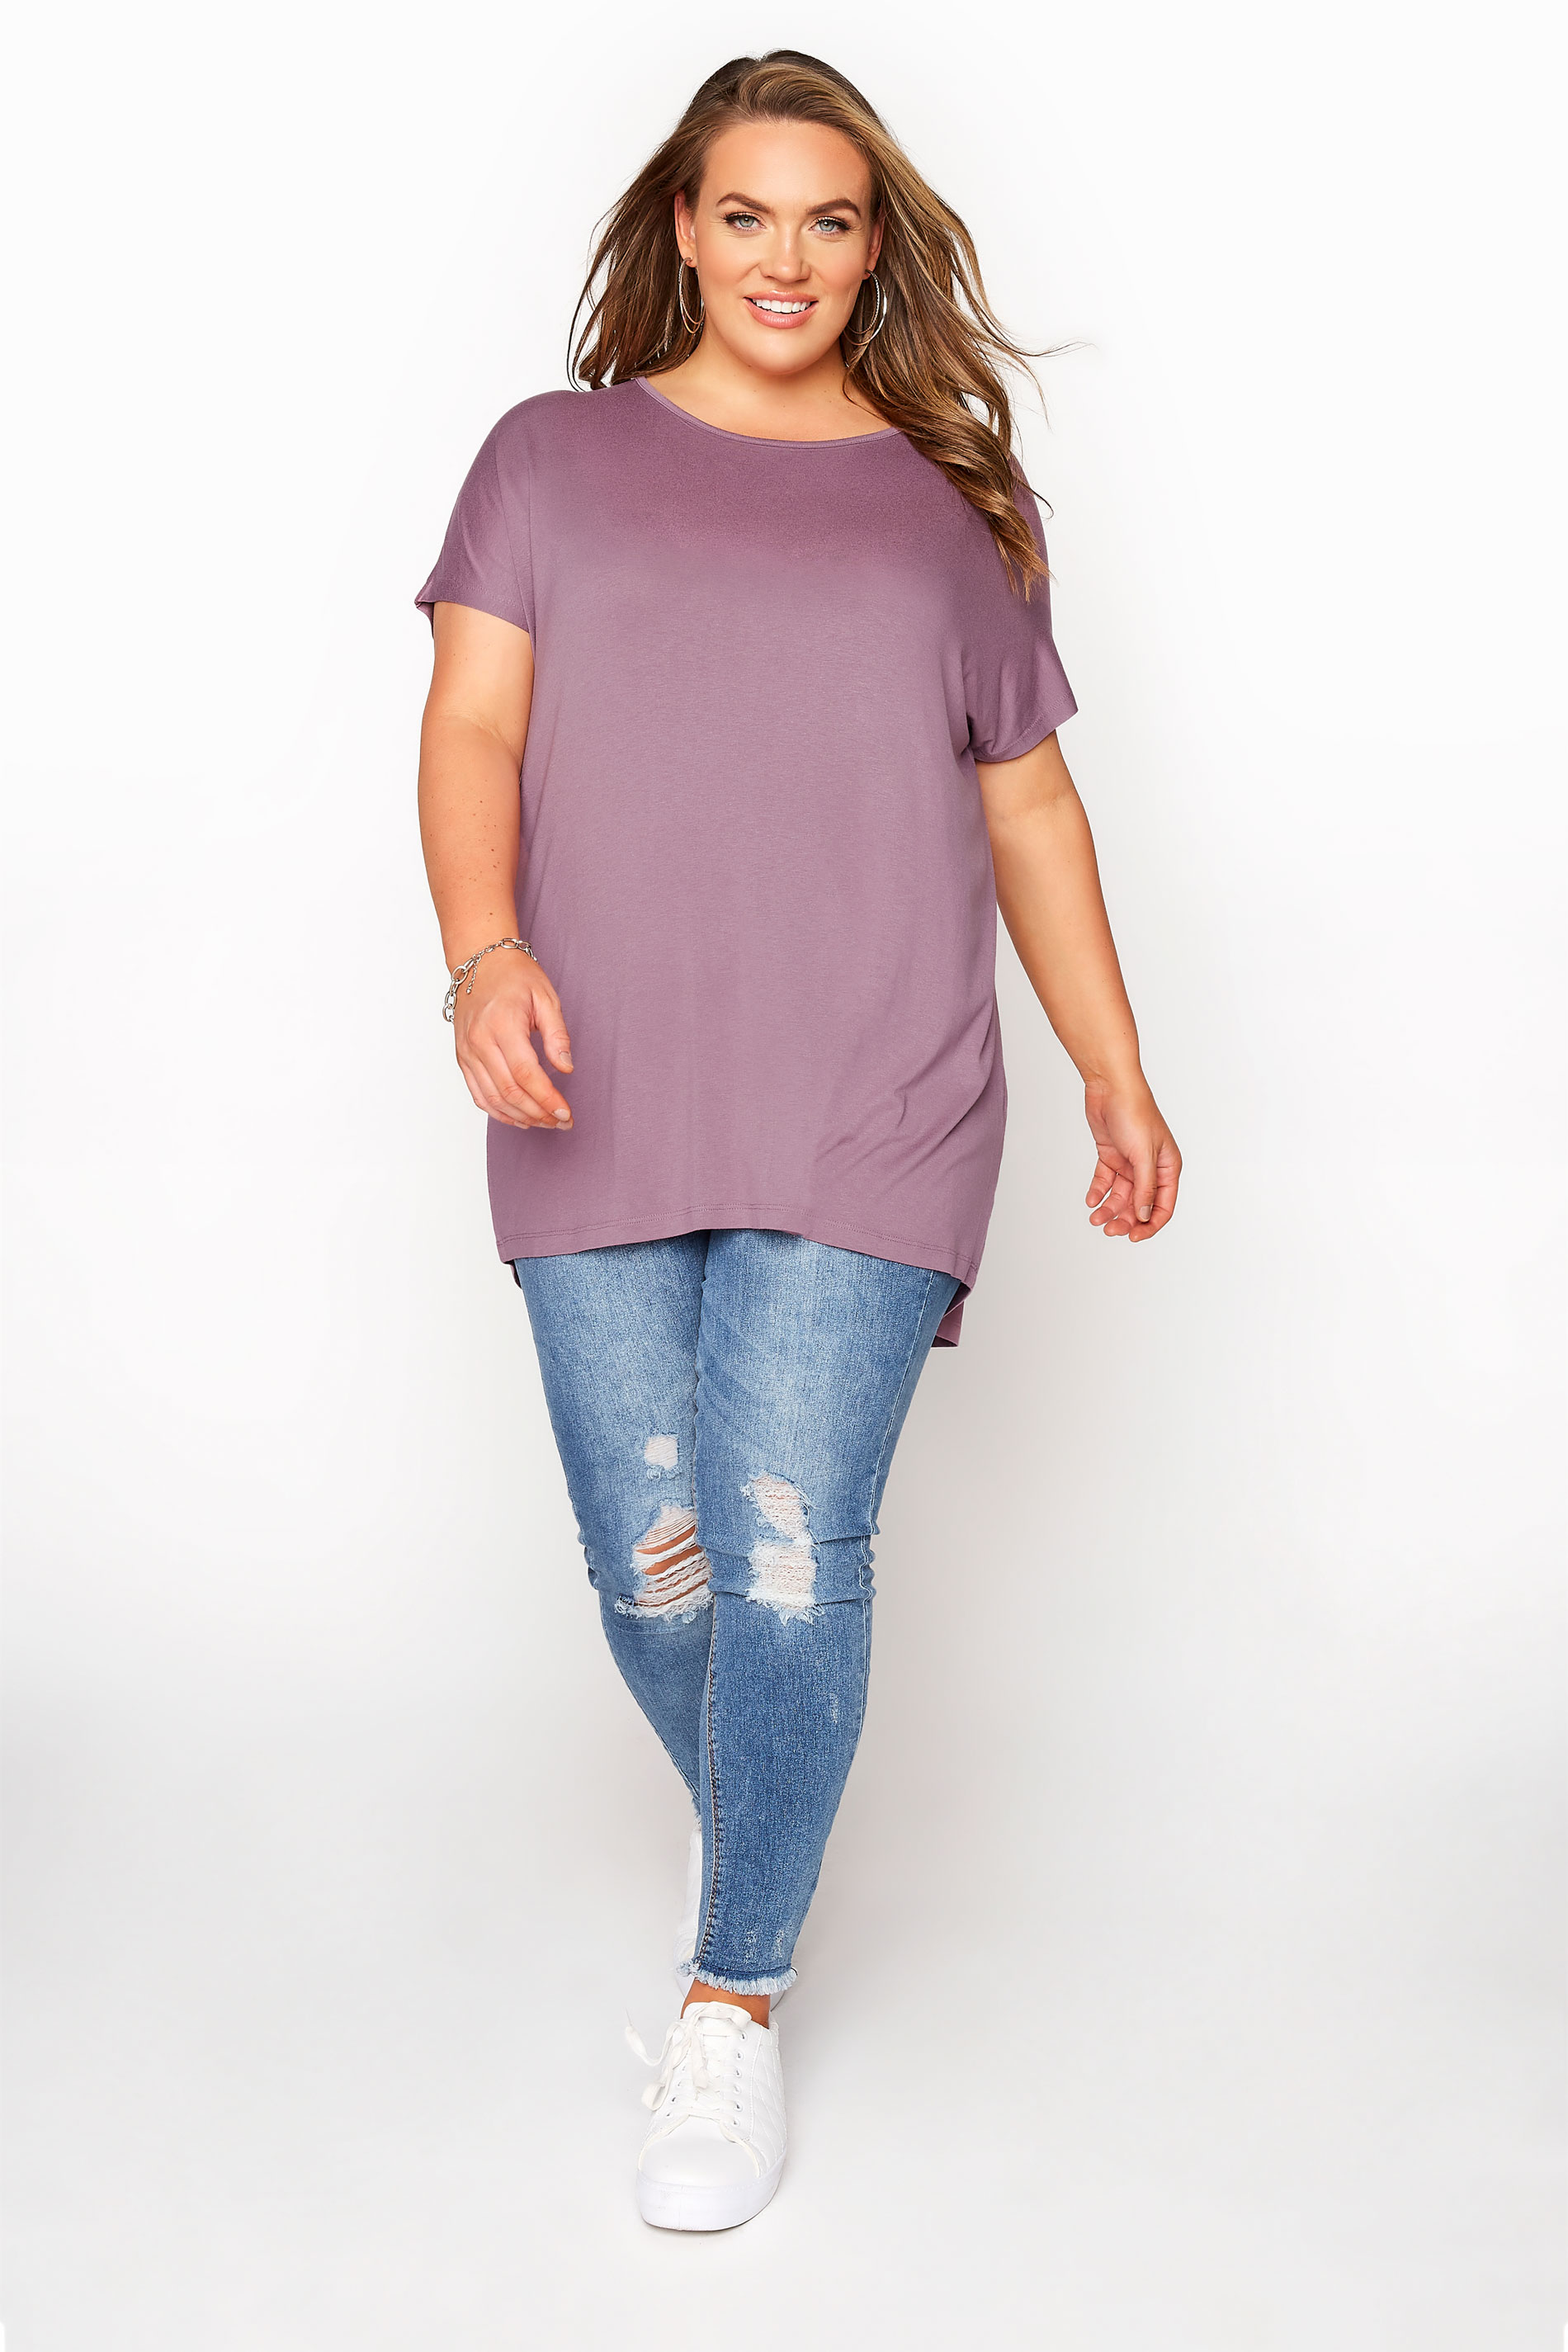 Grande taille  Tops Grande taille  T-Shirts | T-Shirt Mauve Ourlet Plongeant Manches Courtes - IA64268